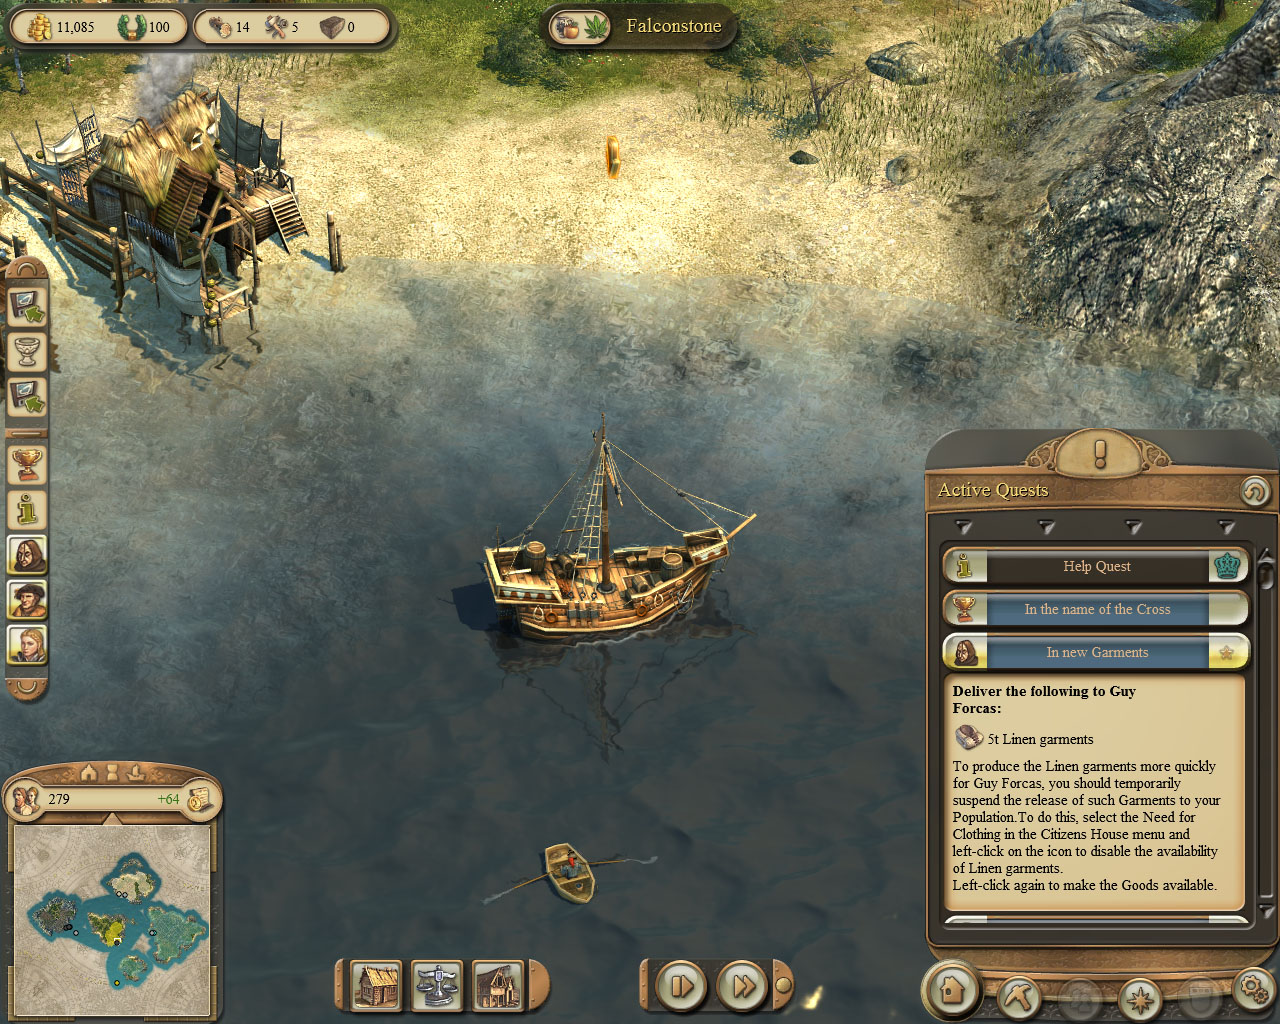 expedition ship in anno 1404